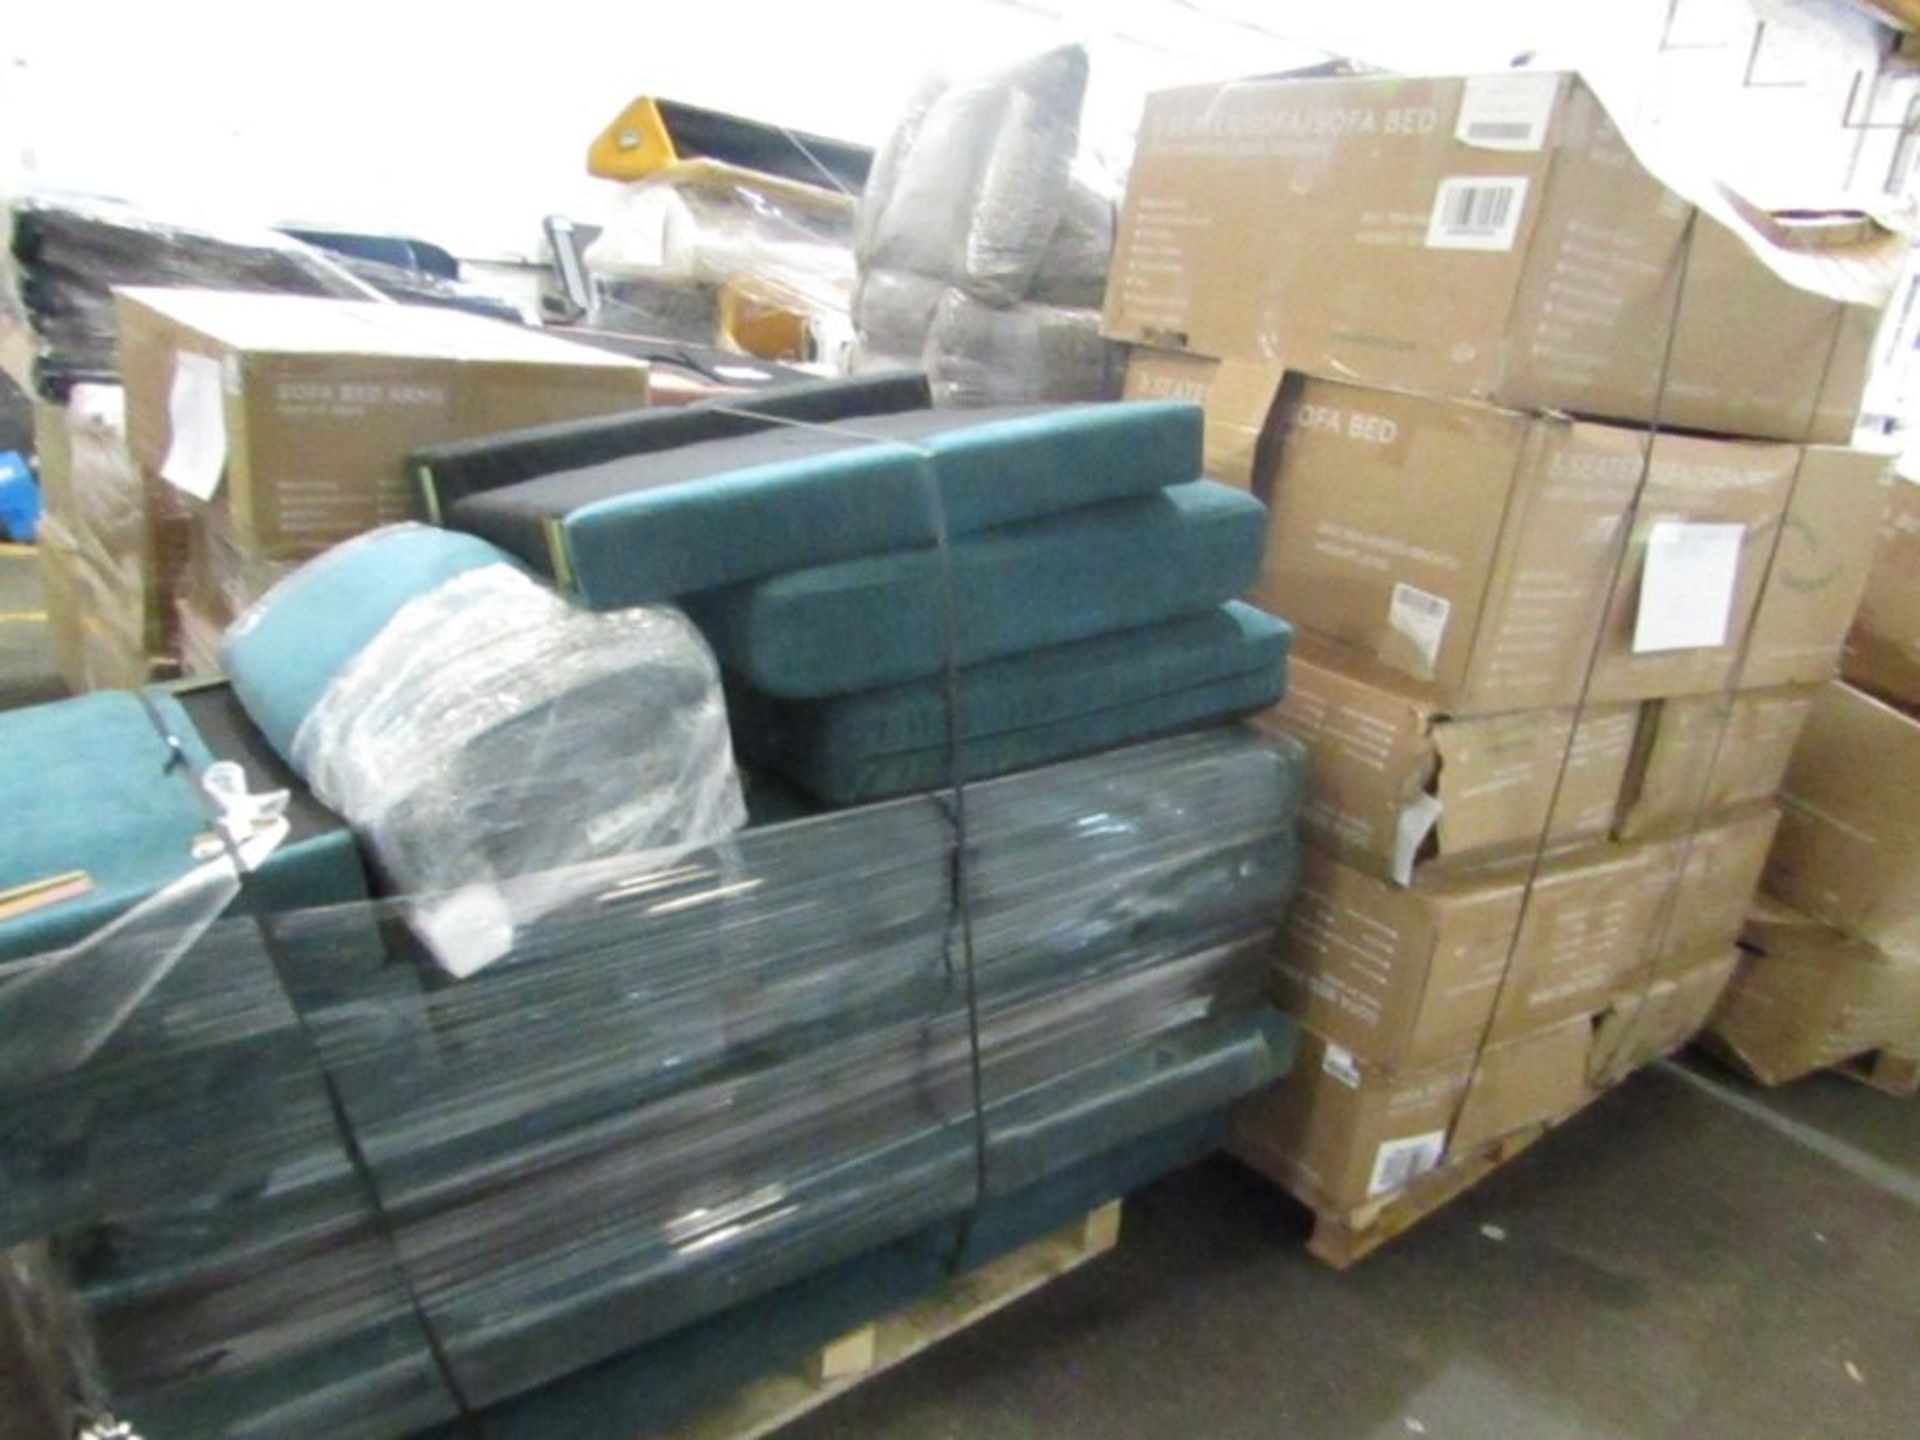 0% Buyers Premium, 24 Pallets of Genuine SNUG SOFA parts - Mixed Lots of Bases Backs Arms Cushions - Image 11 of 16